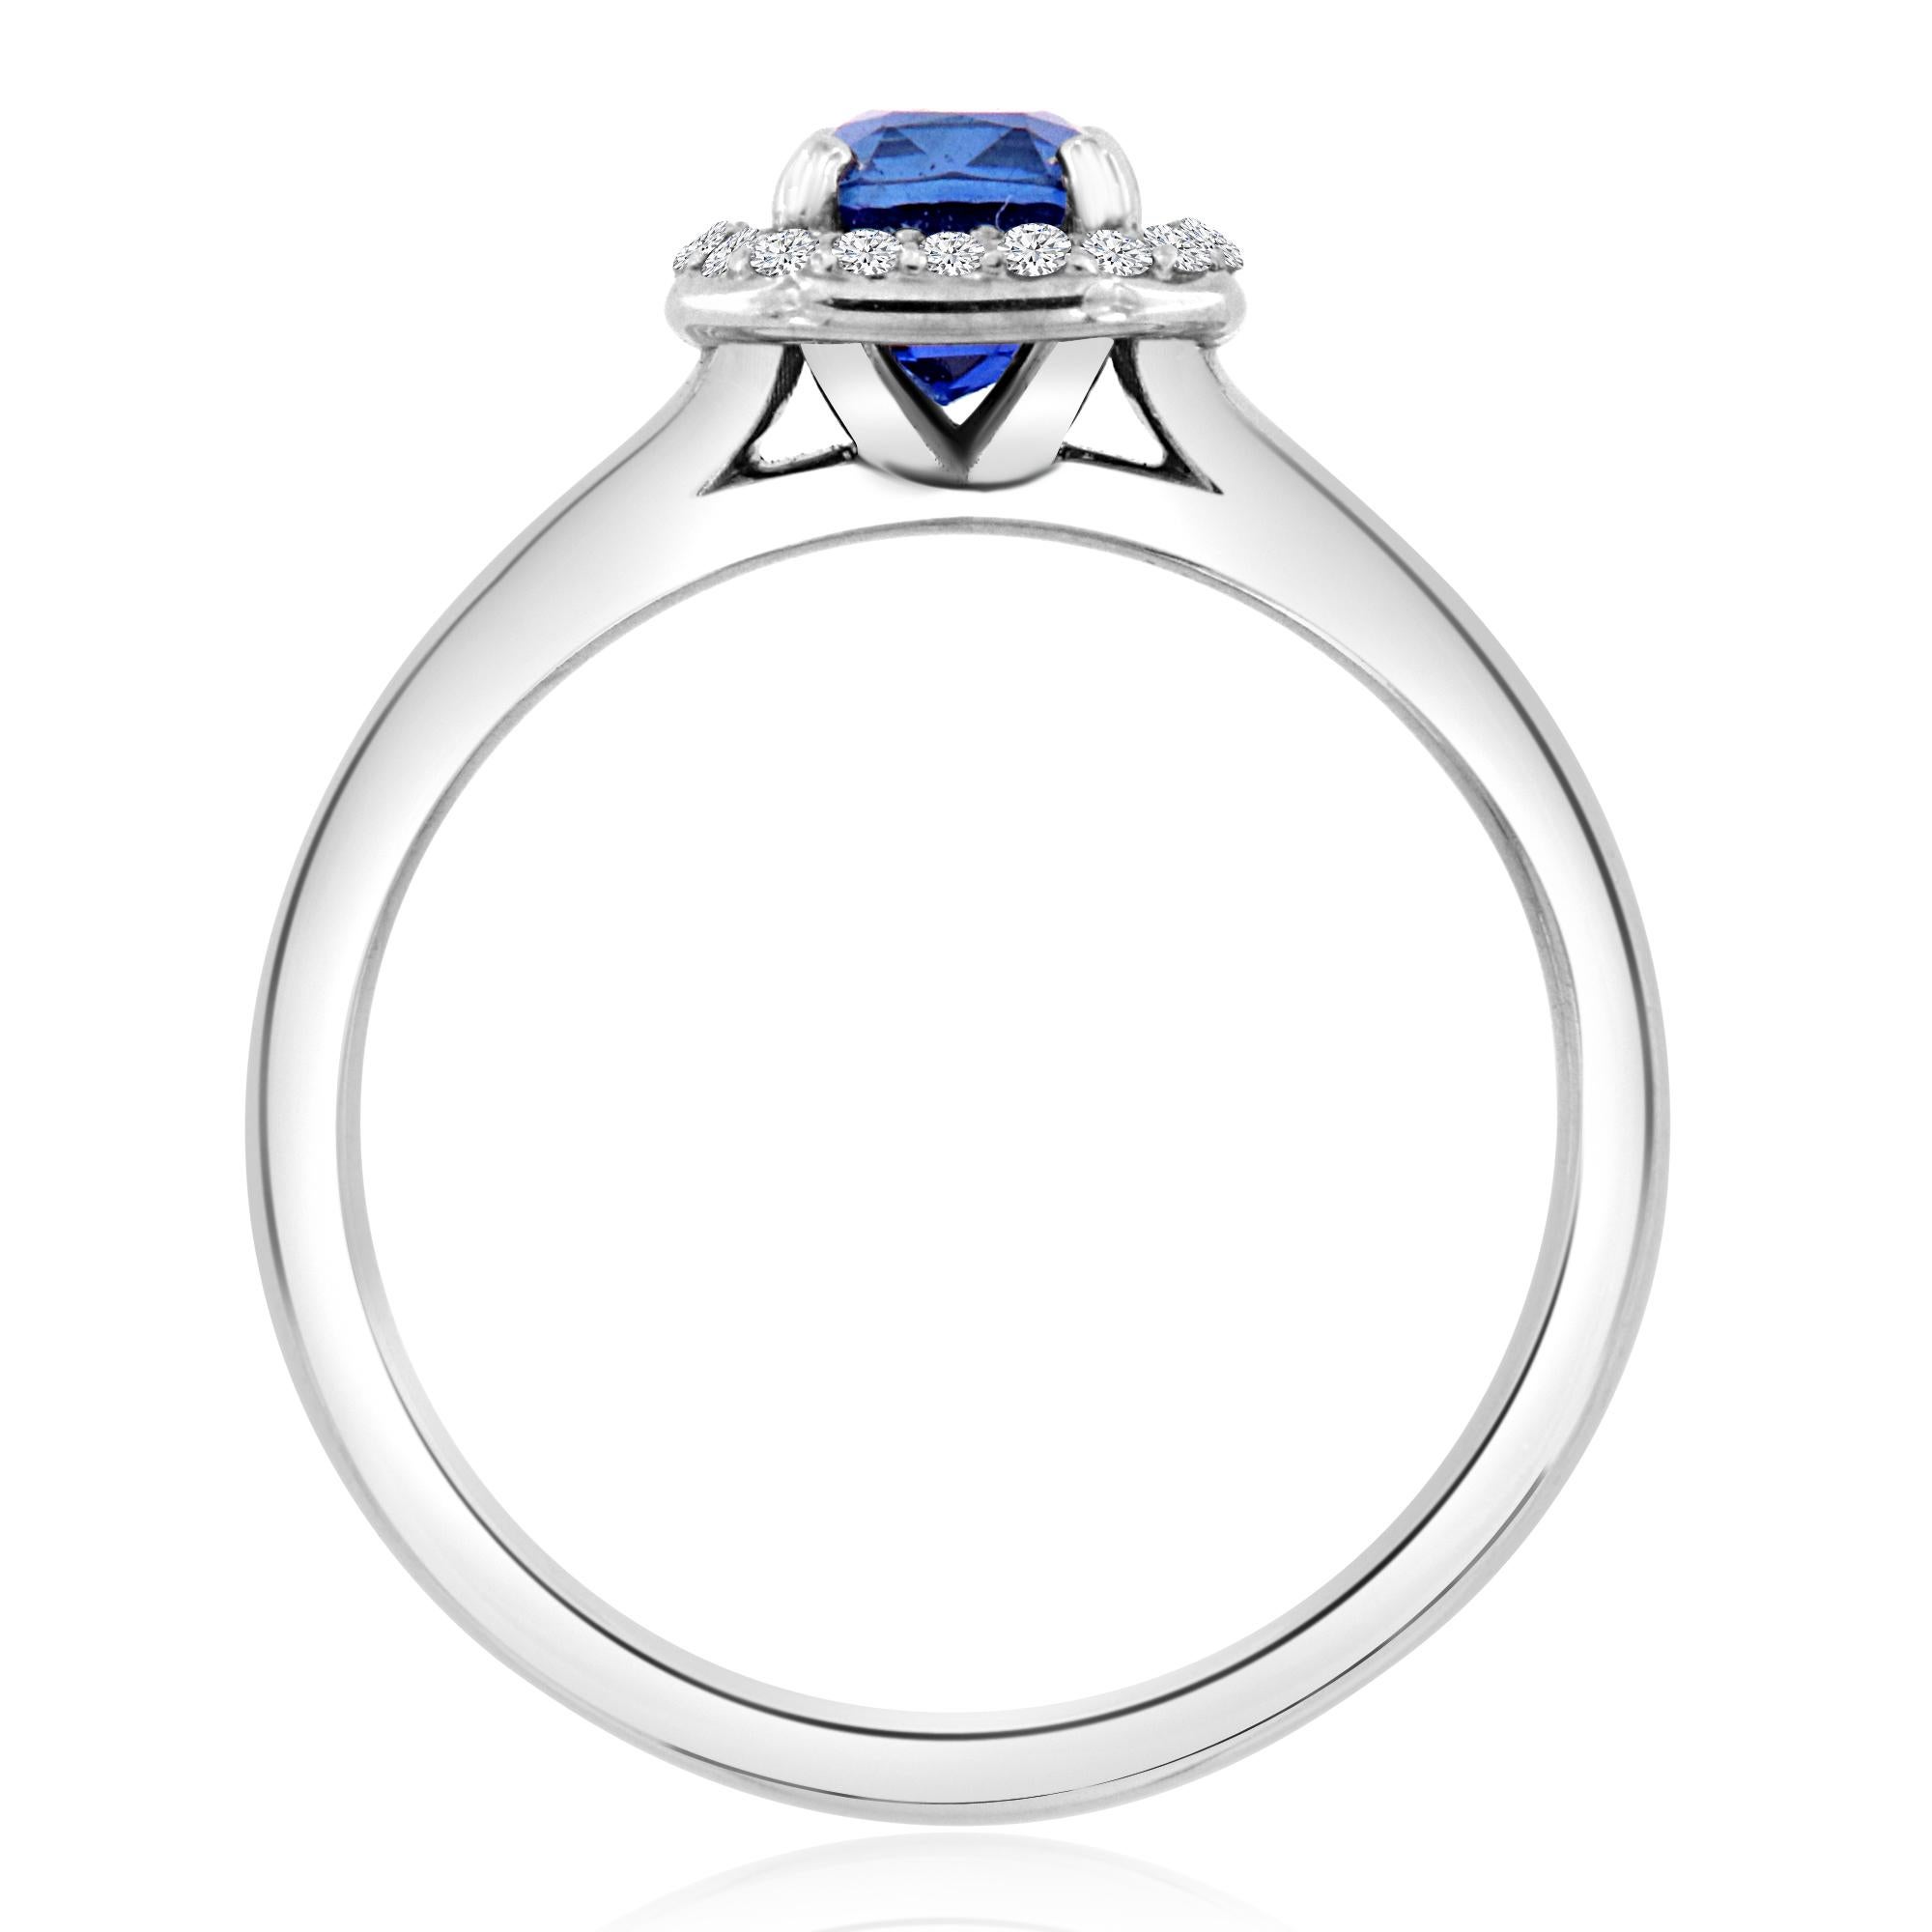 This elegant ring features a 1.38 - carat Elongated Cushion Sri Lankan Blue Sapphire encircled by a halo of round melee diamonds. Experience the difference in person!

Product details: 

Center Gemstone Type: SAPPHIRE
Center Gemstone Carat Weight: